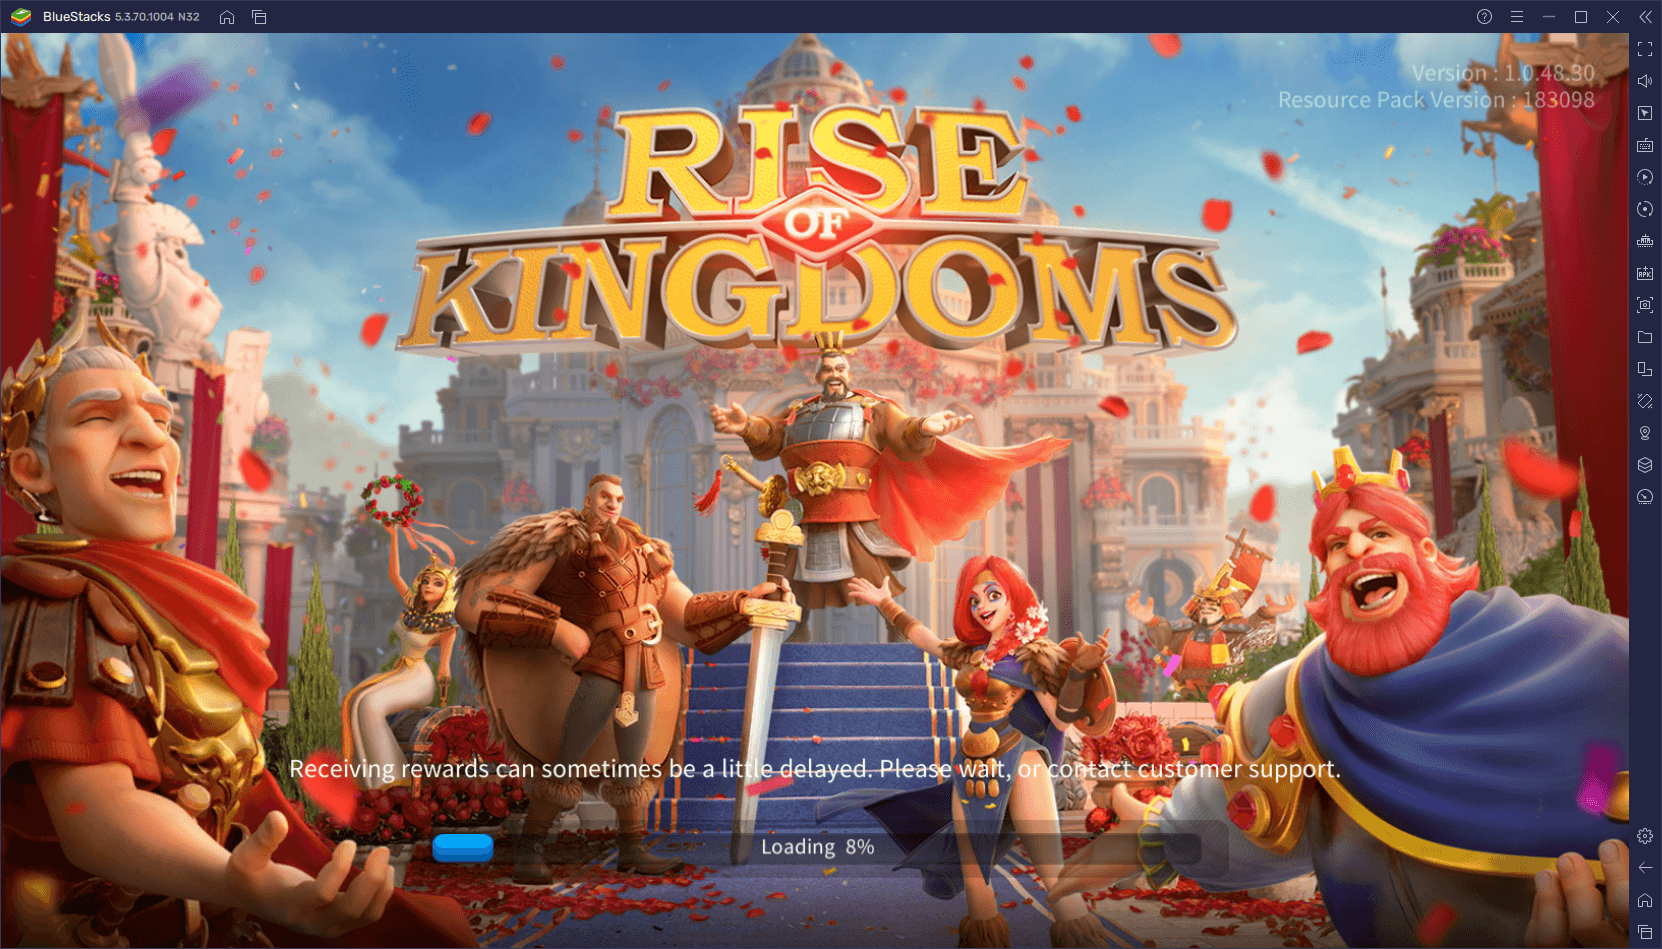 Benefits of Playing Rise of Kingdoms on BlueStacks – Develop Your Town with just a Few Clicks, Make Multitasking Easier, and More